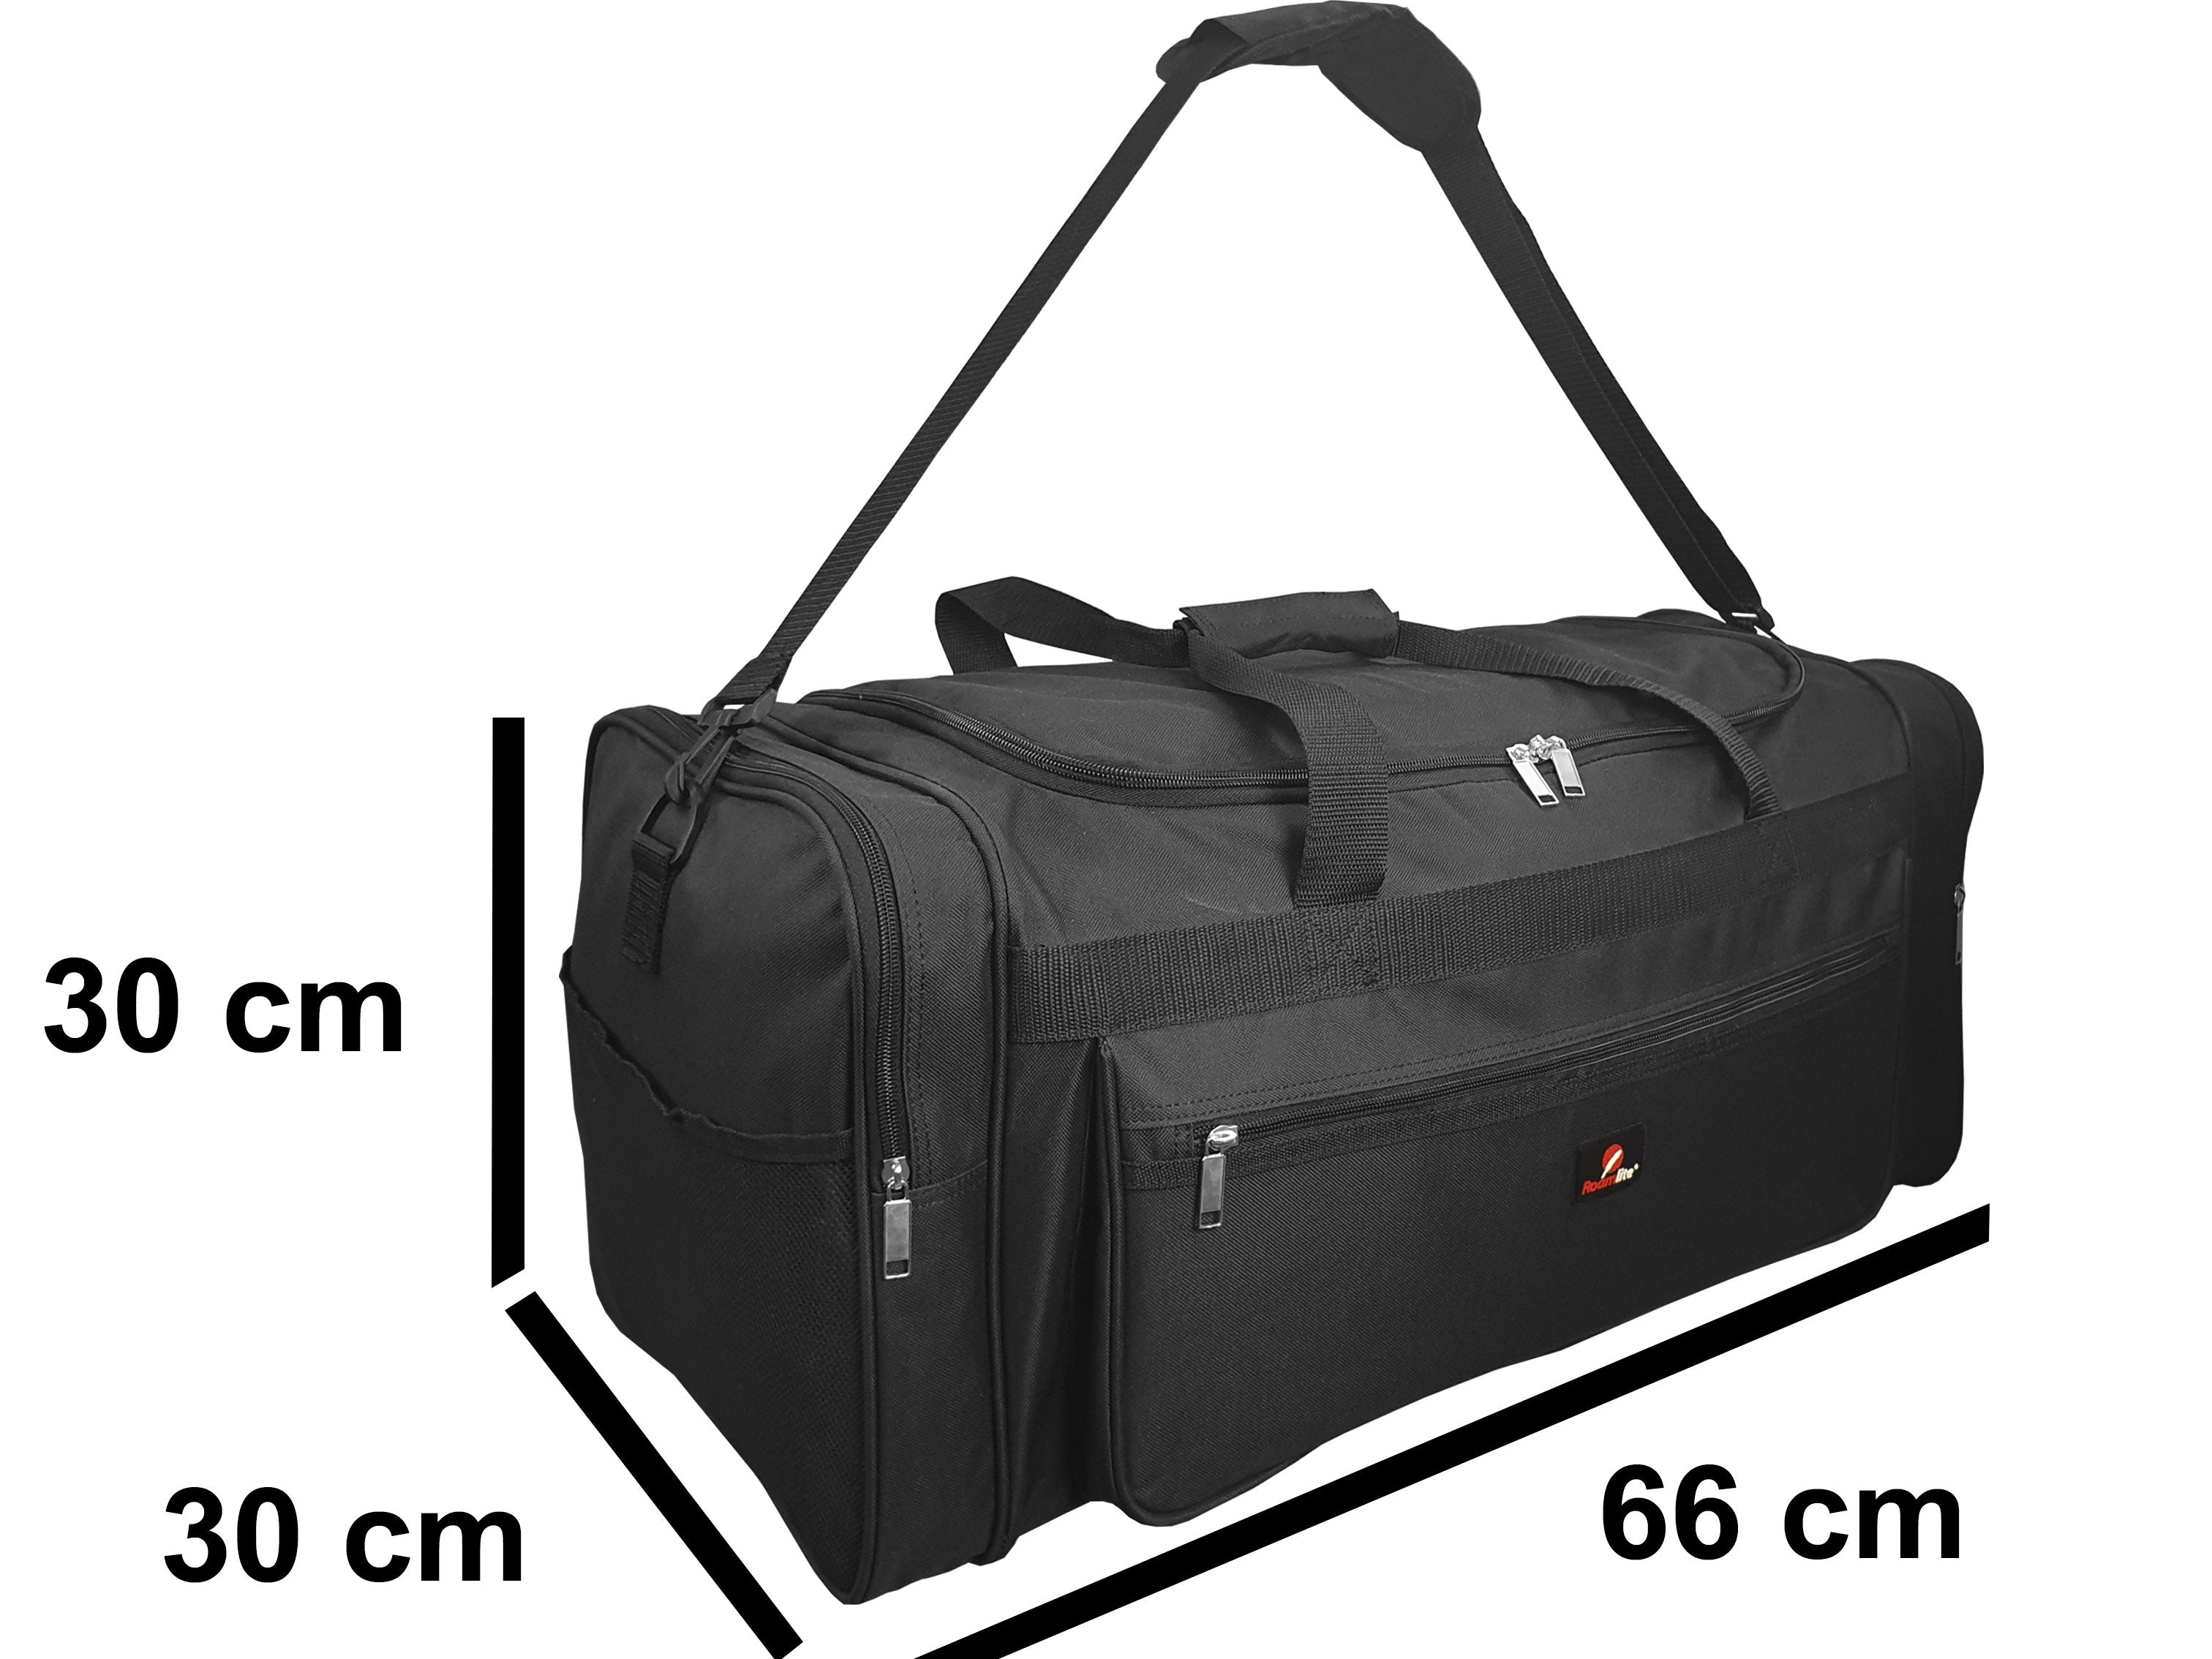 Large Size Weekend Holdall or Overnight Duffle - Ideal Gym Sports Bag